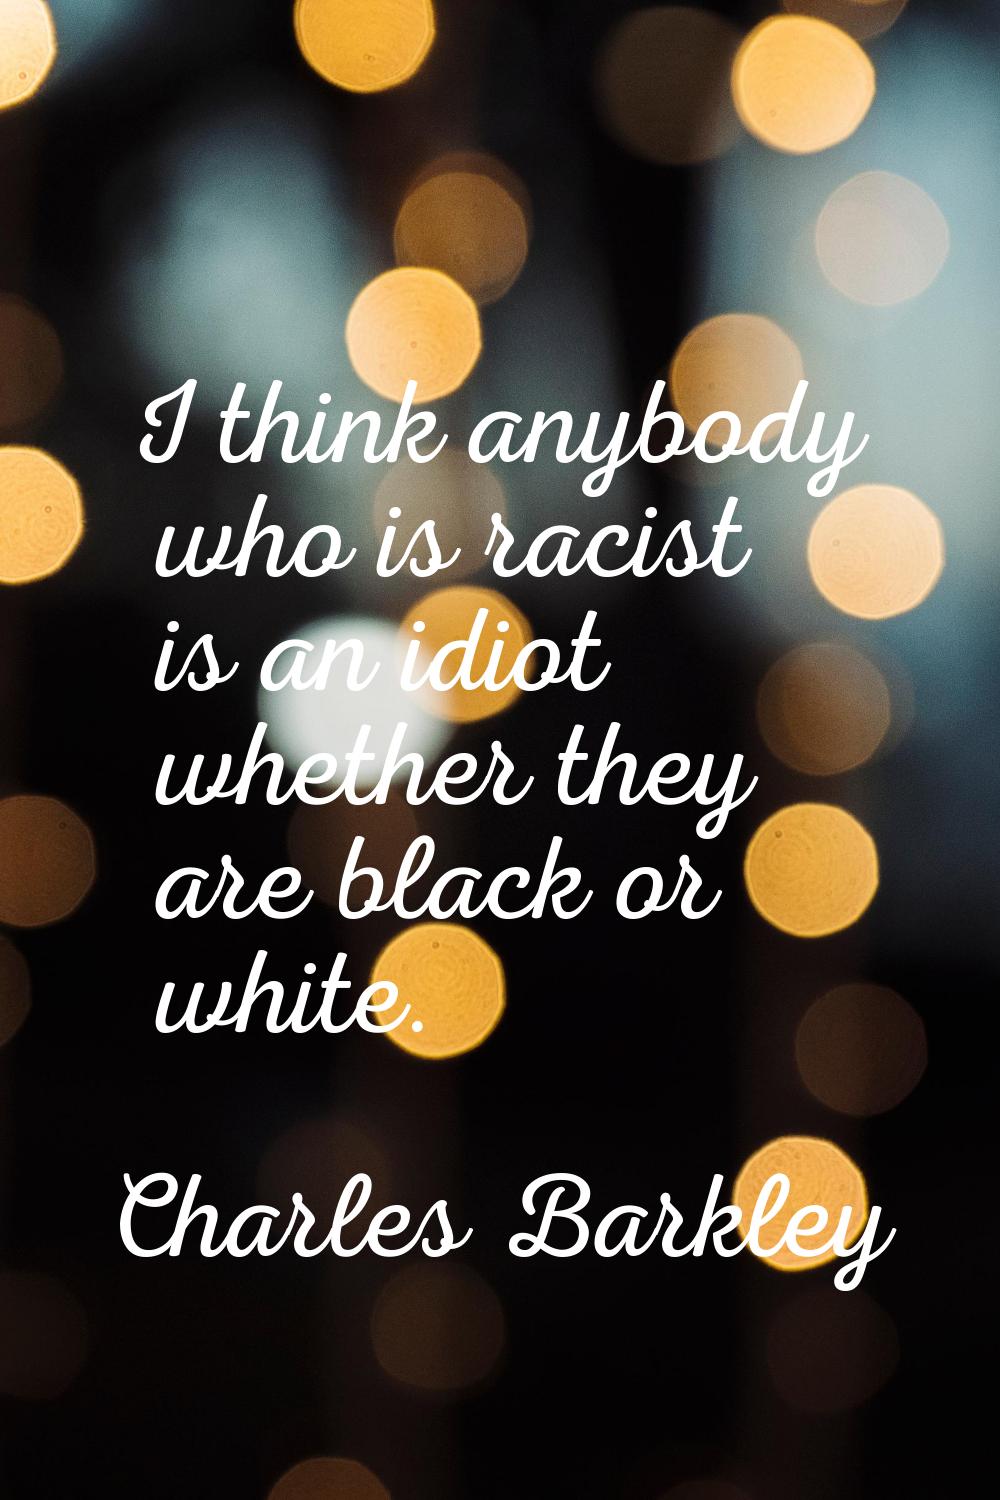 I think anybody who is racist is an idiot whether they are black or white.